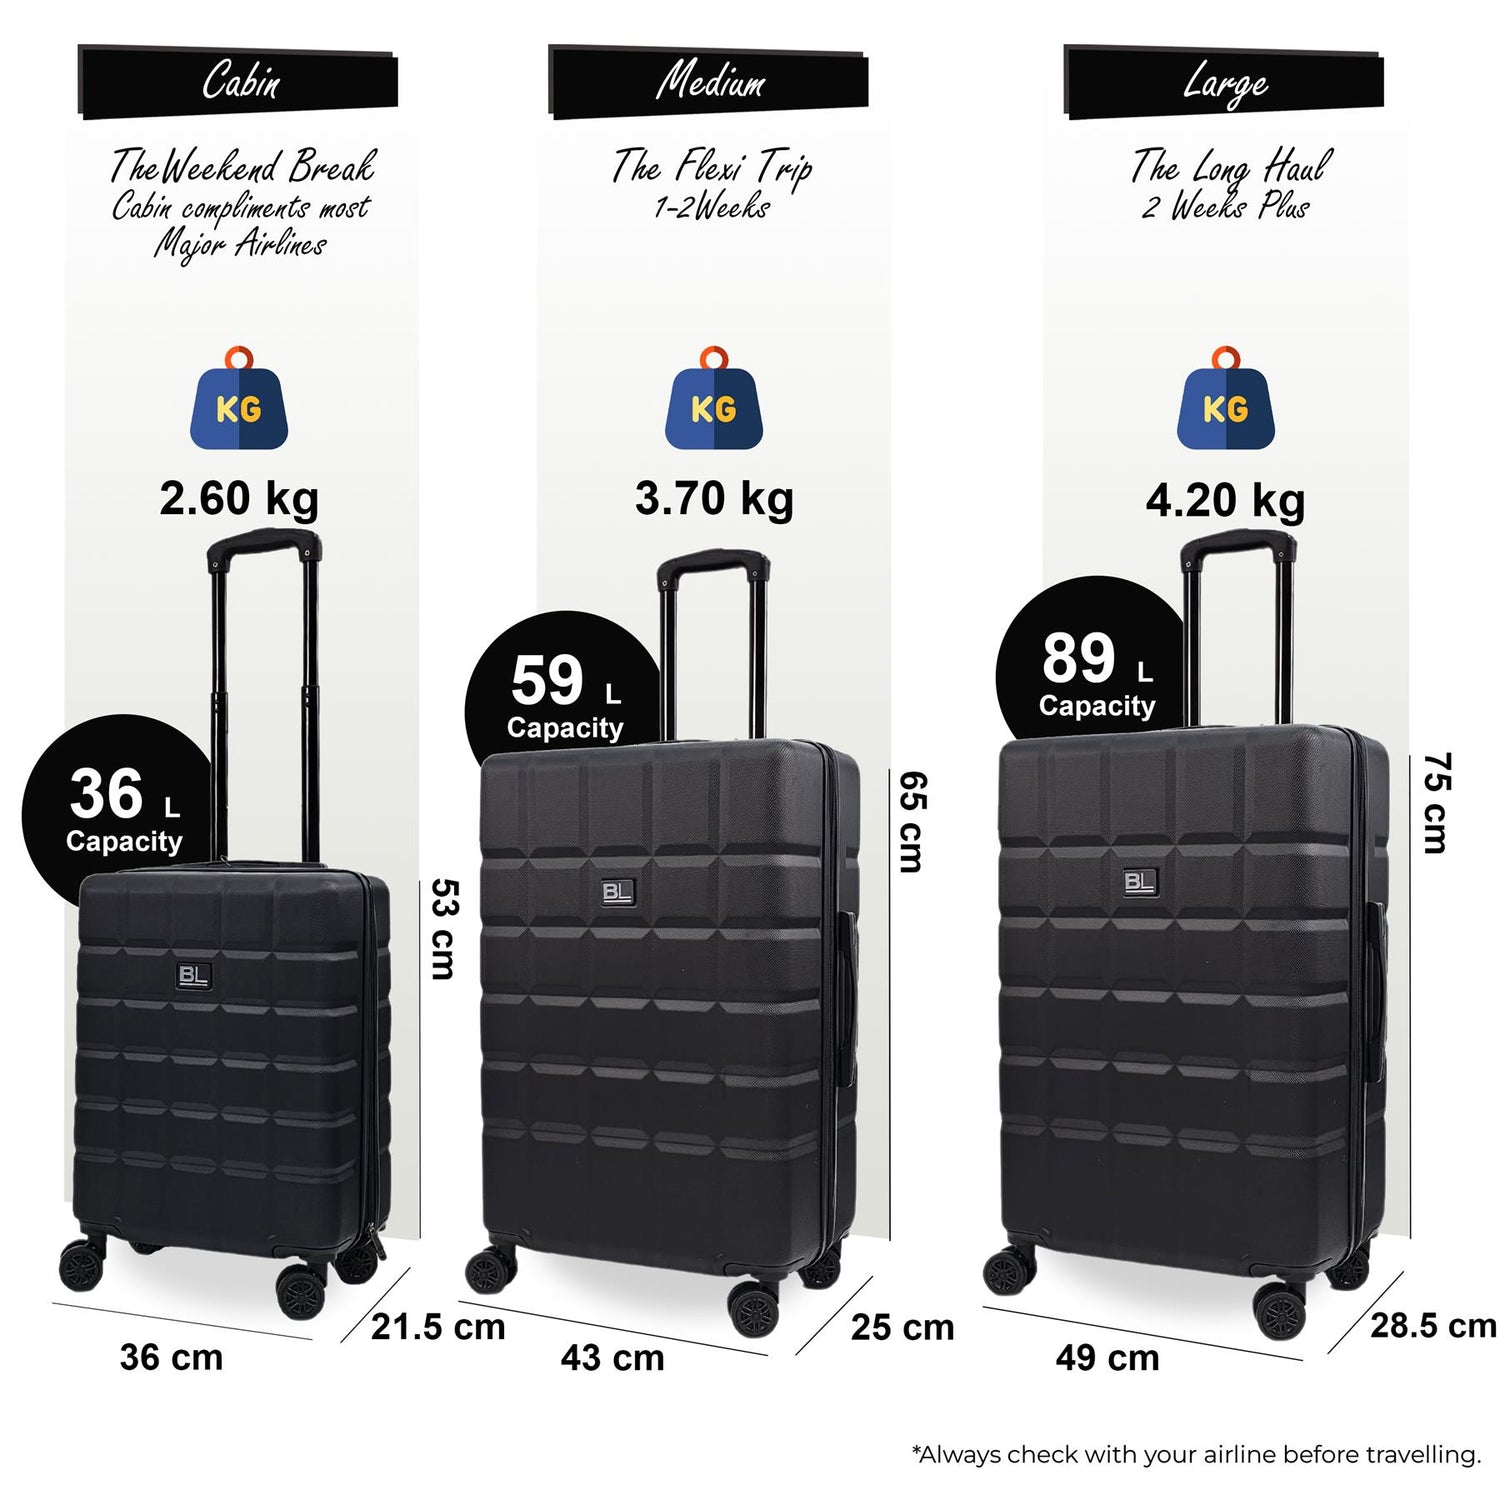 Coker Set of 3 Soft Shell Suitcase in Black